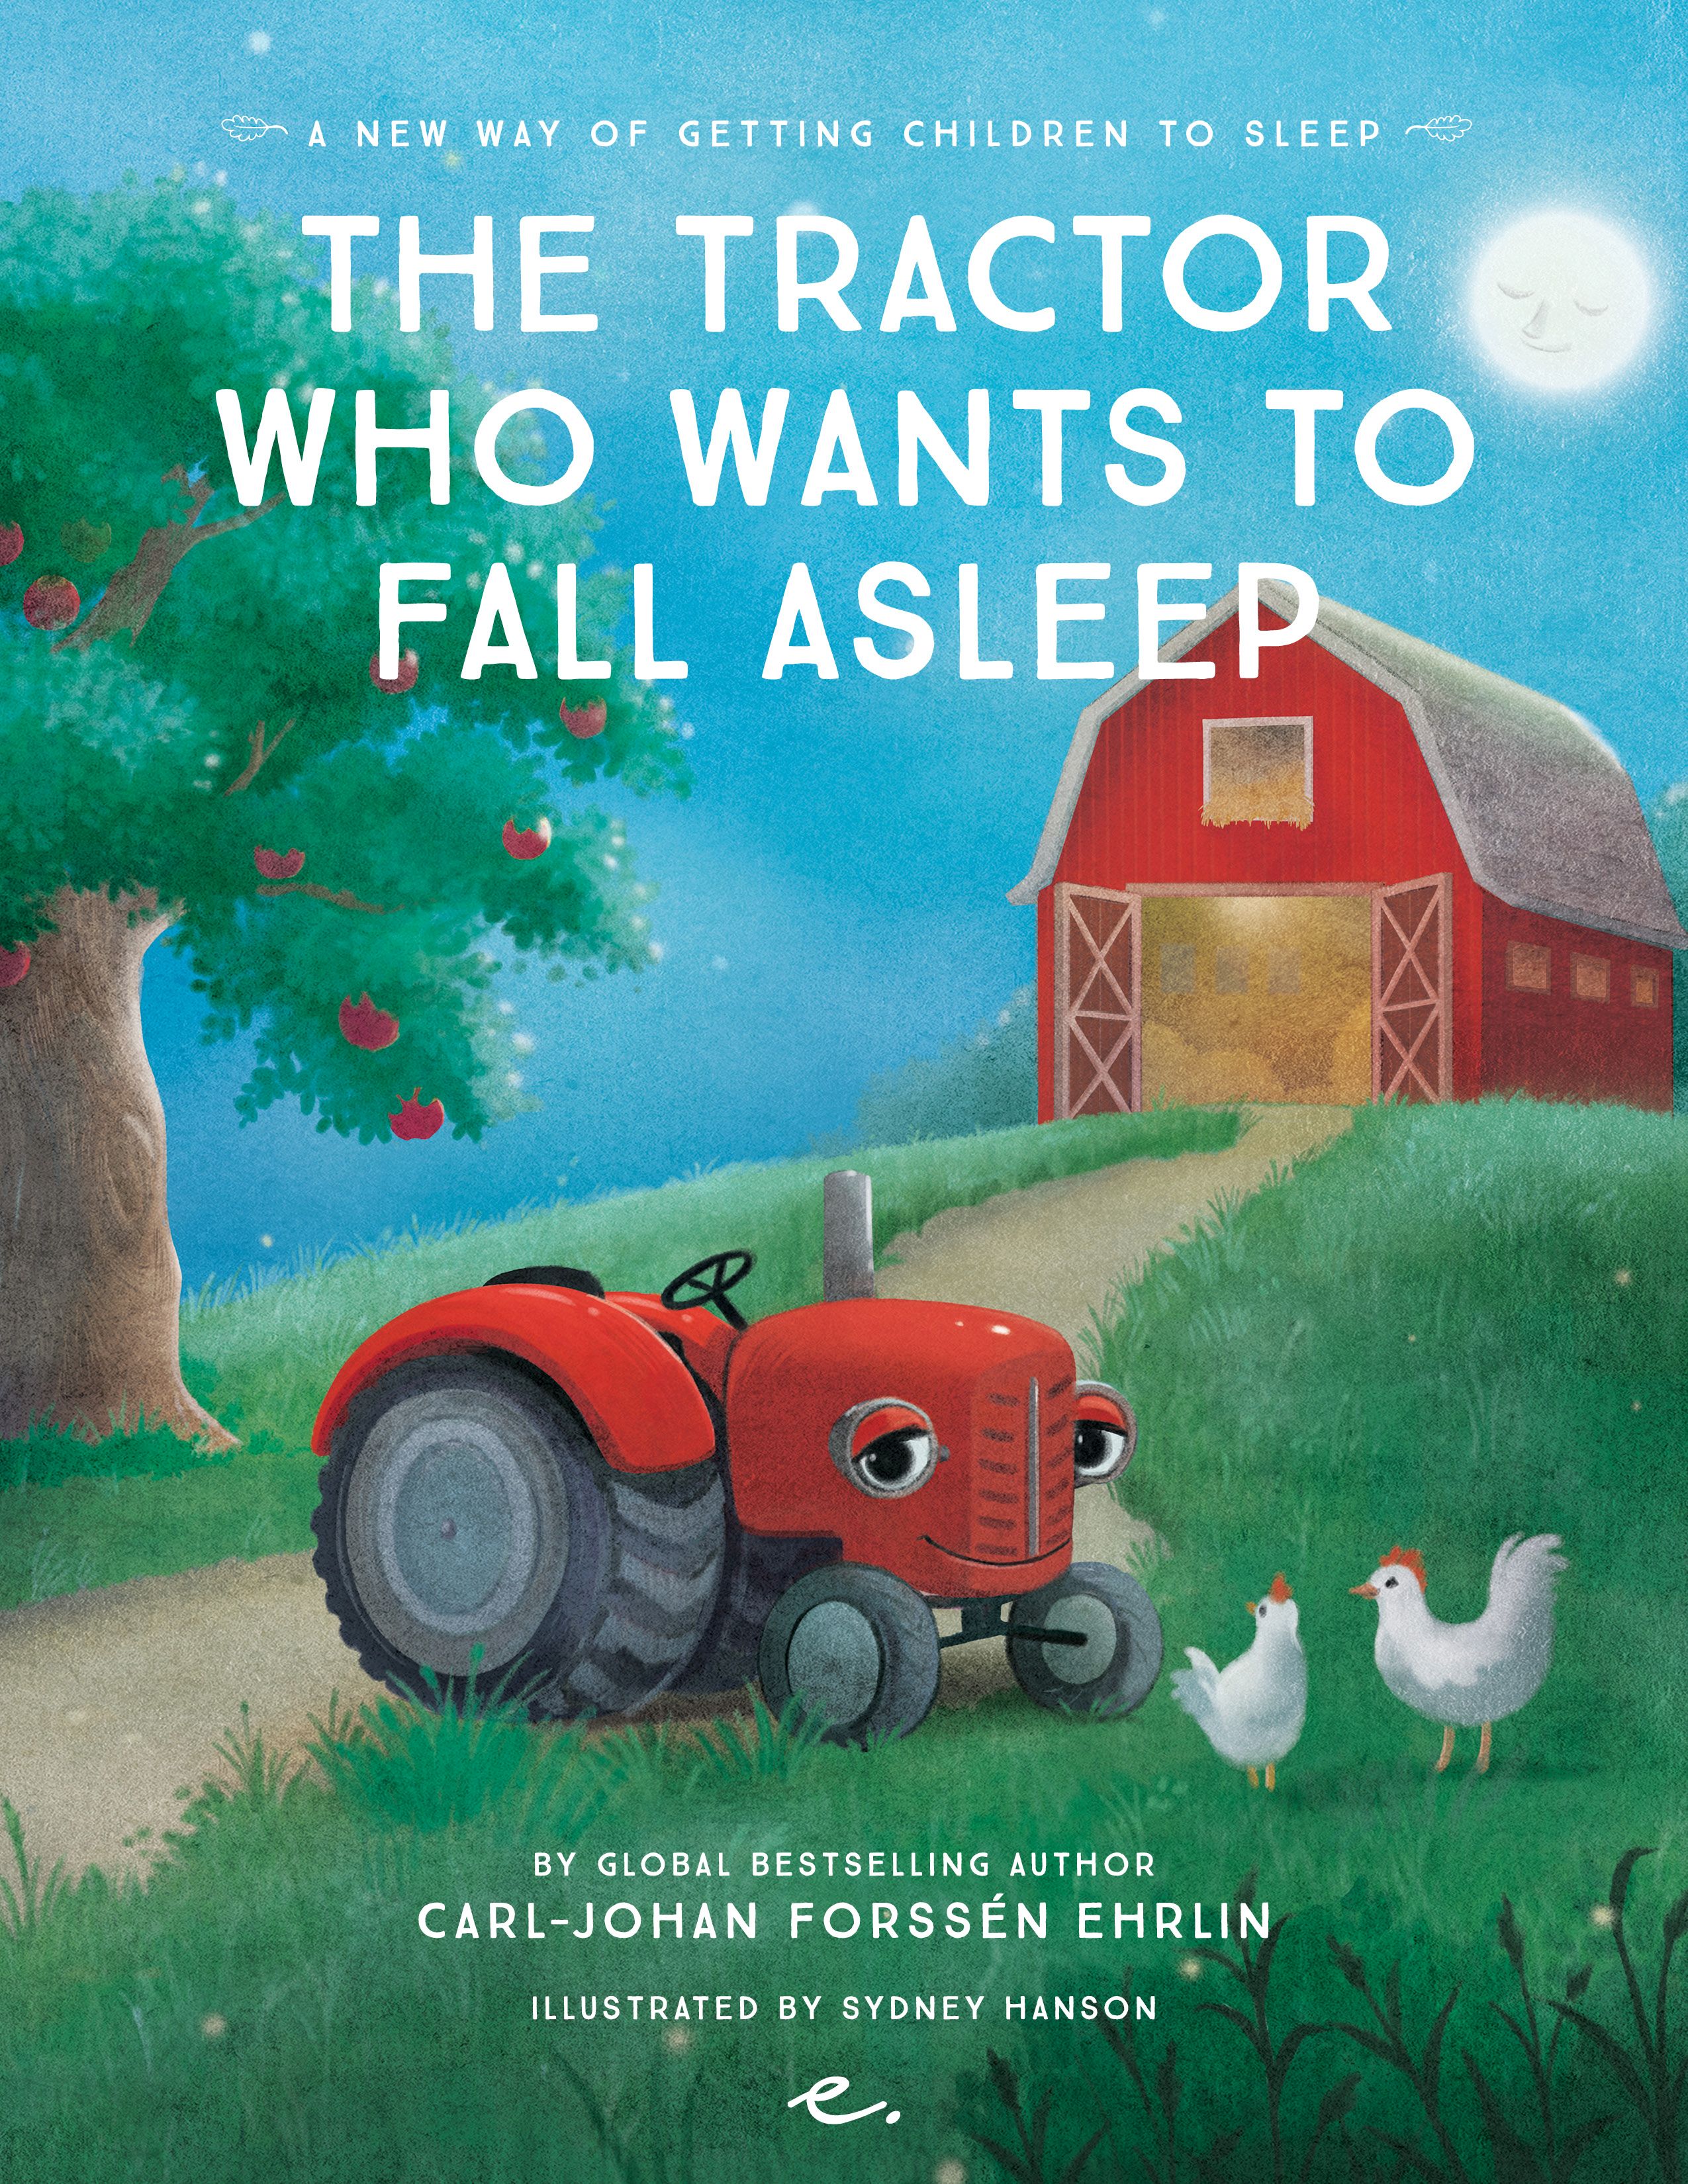 The Tractor Who Wants to Fall Asleep : A New Way of Getting Children to Sleep, e-bog af Carl-Johan Forssén Ehrlin